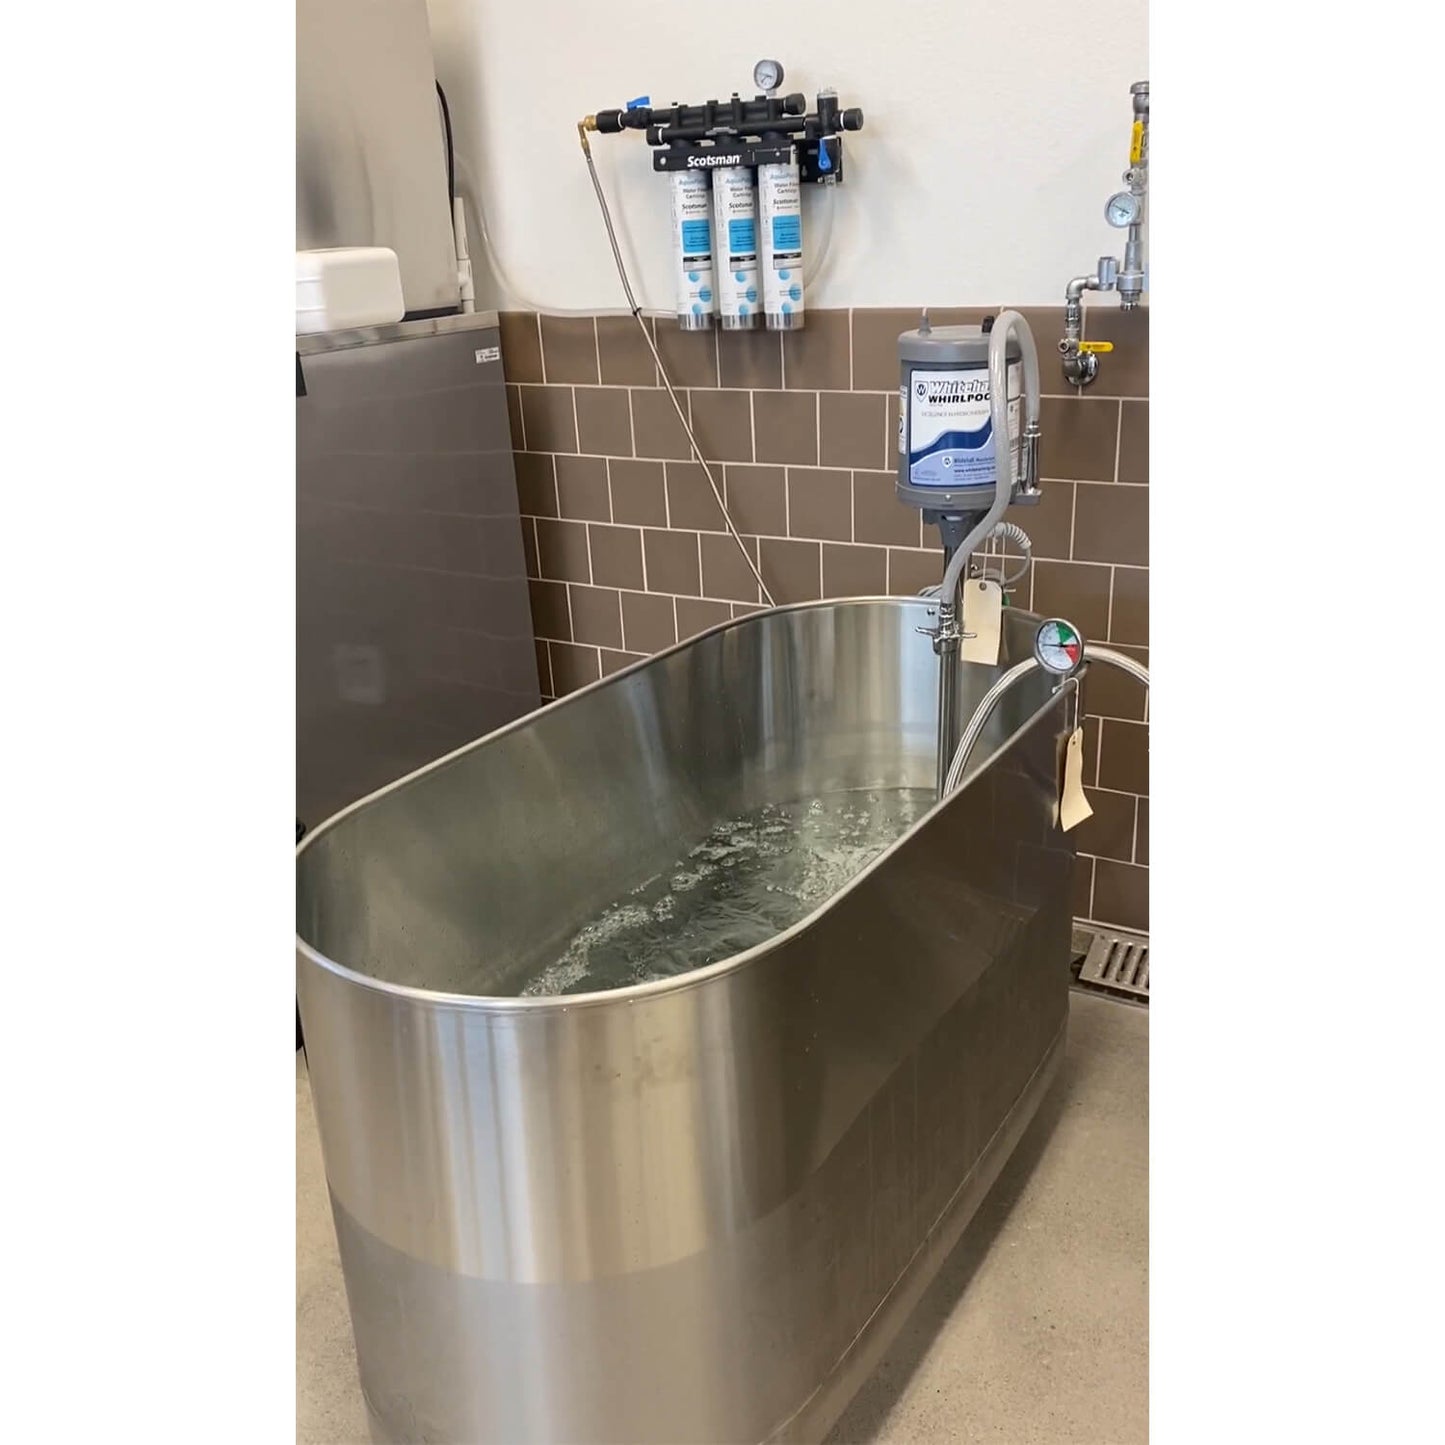 S-110-M 110 Gallon Mobile Whirlpool in Use